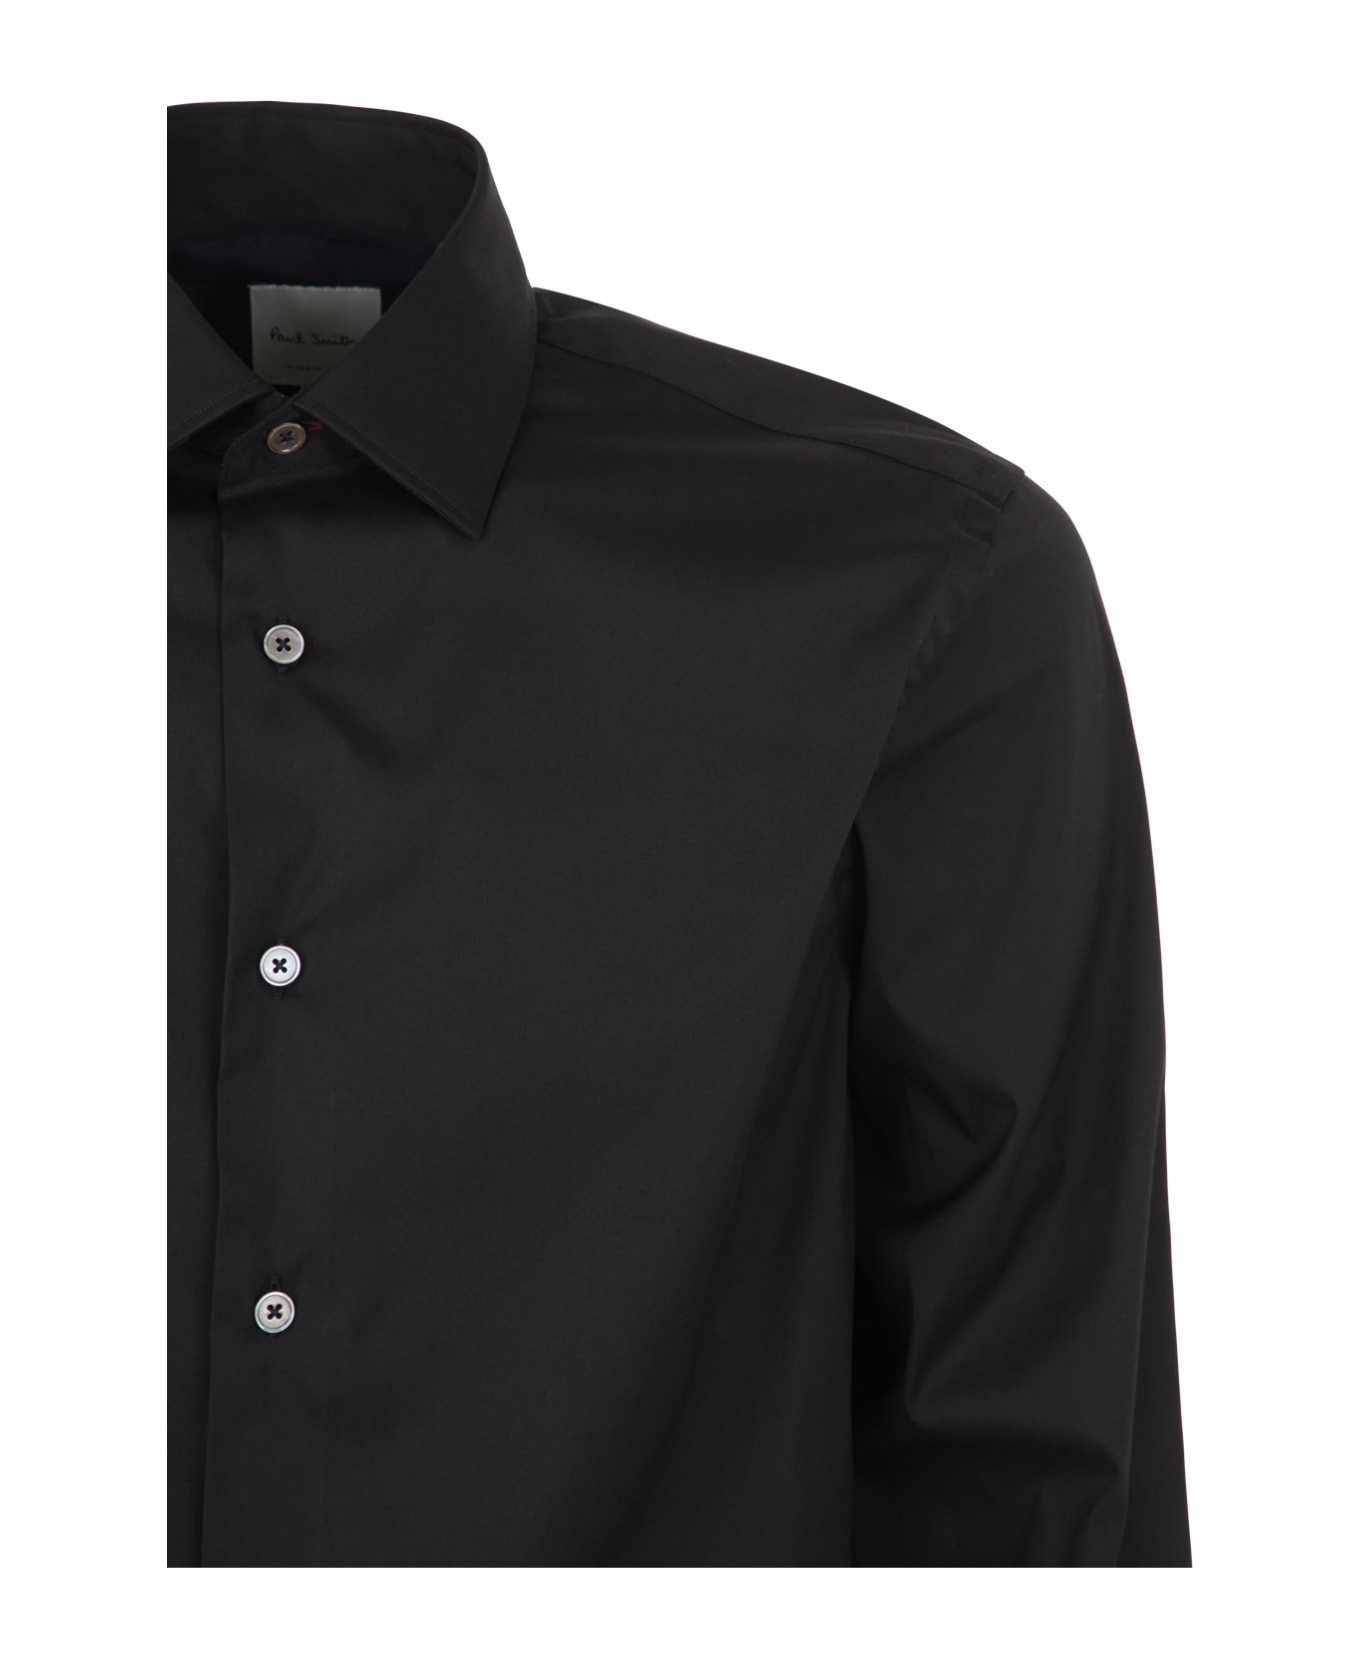 Paul Smith Mens Tailored Fit Shirt - Black